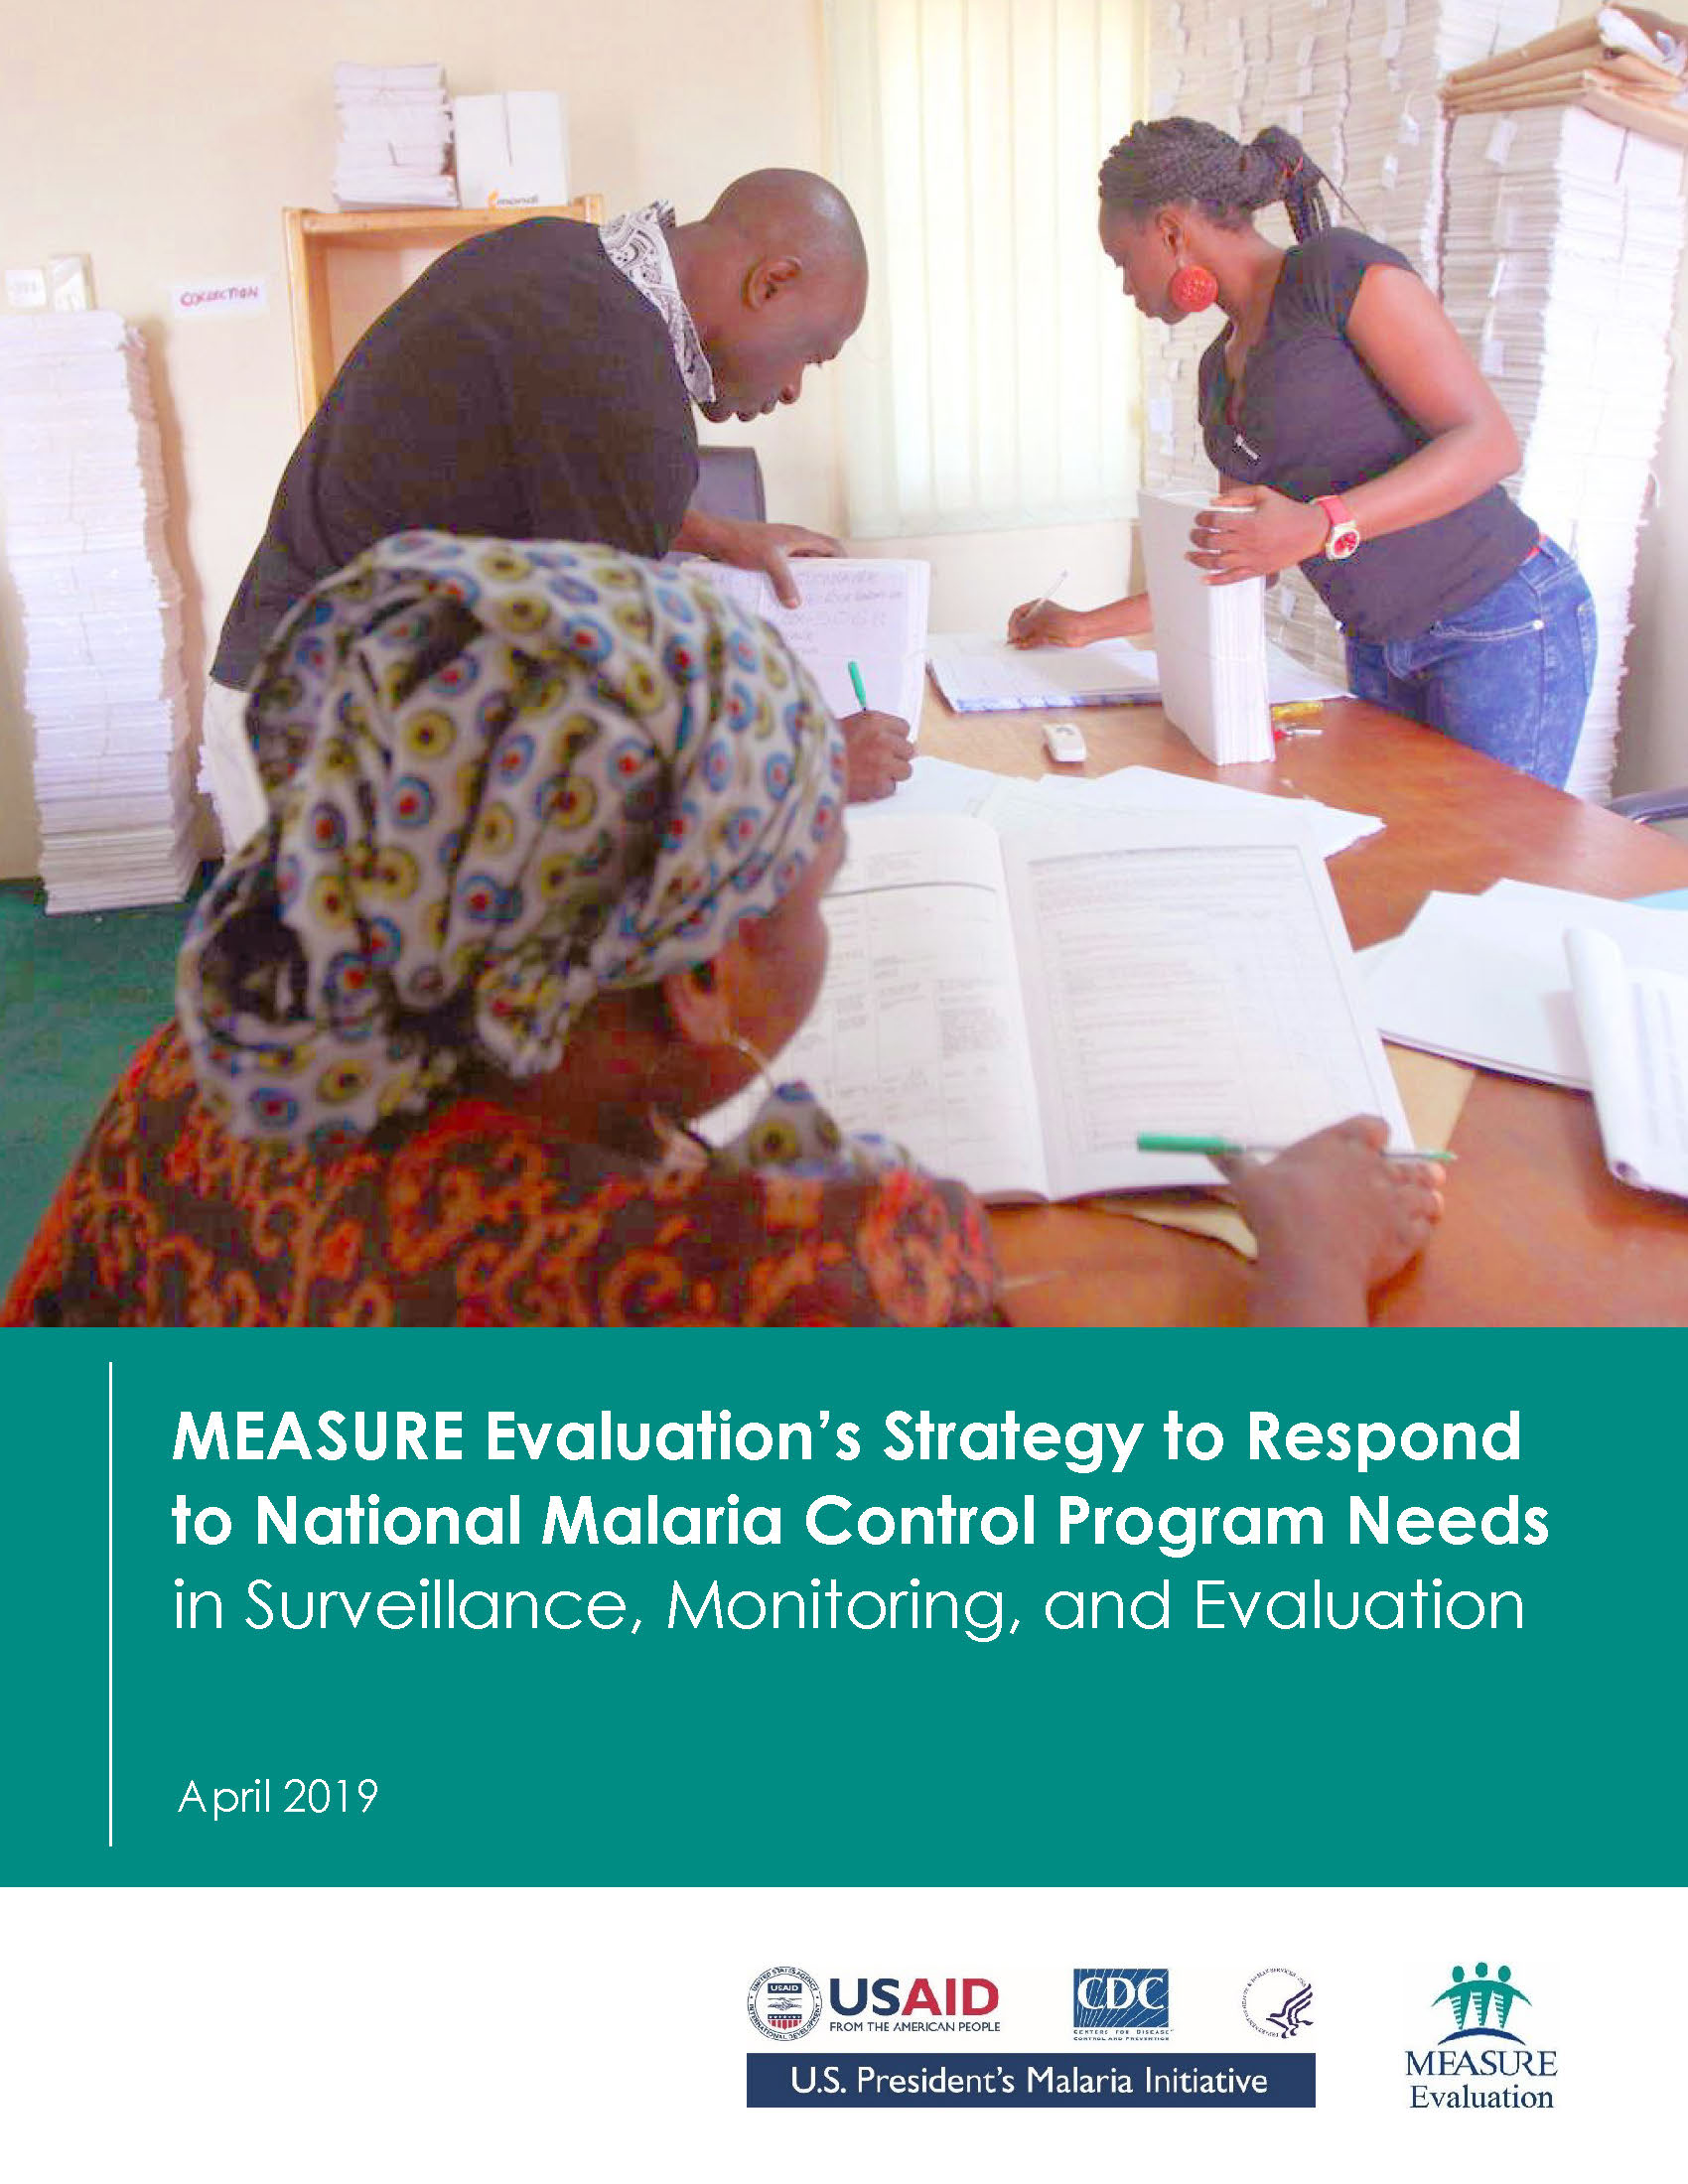 MEASURE Evaluations Strategy to Respond to National Malaria Control Program Needs in Surveillance